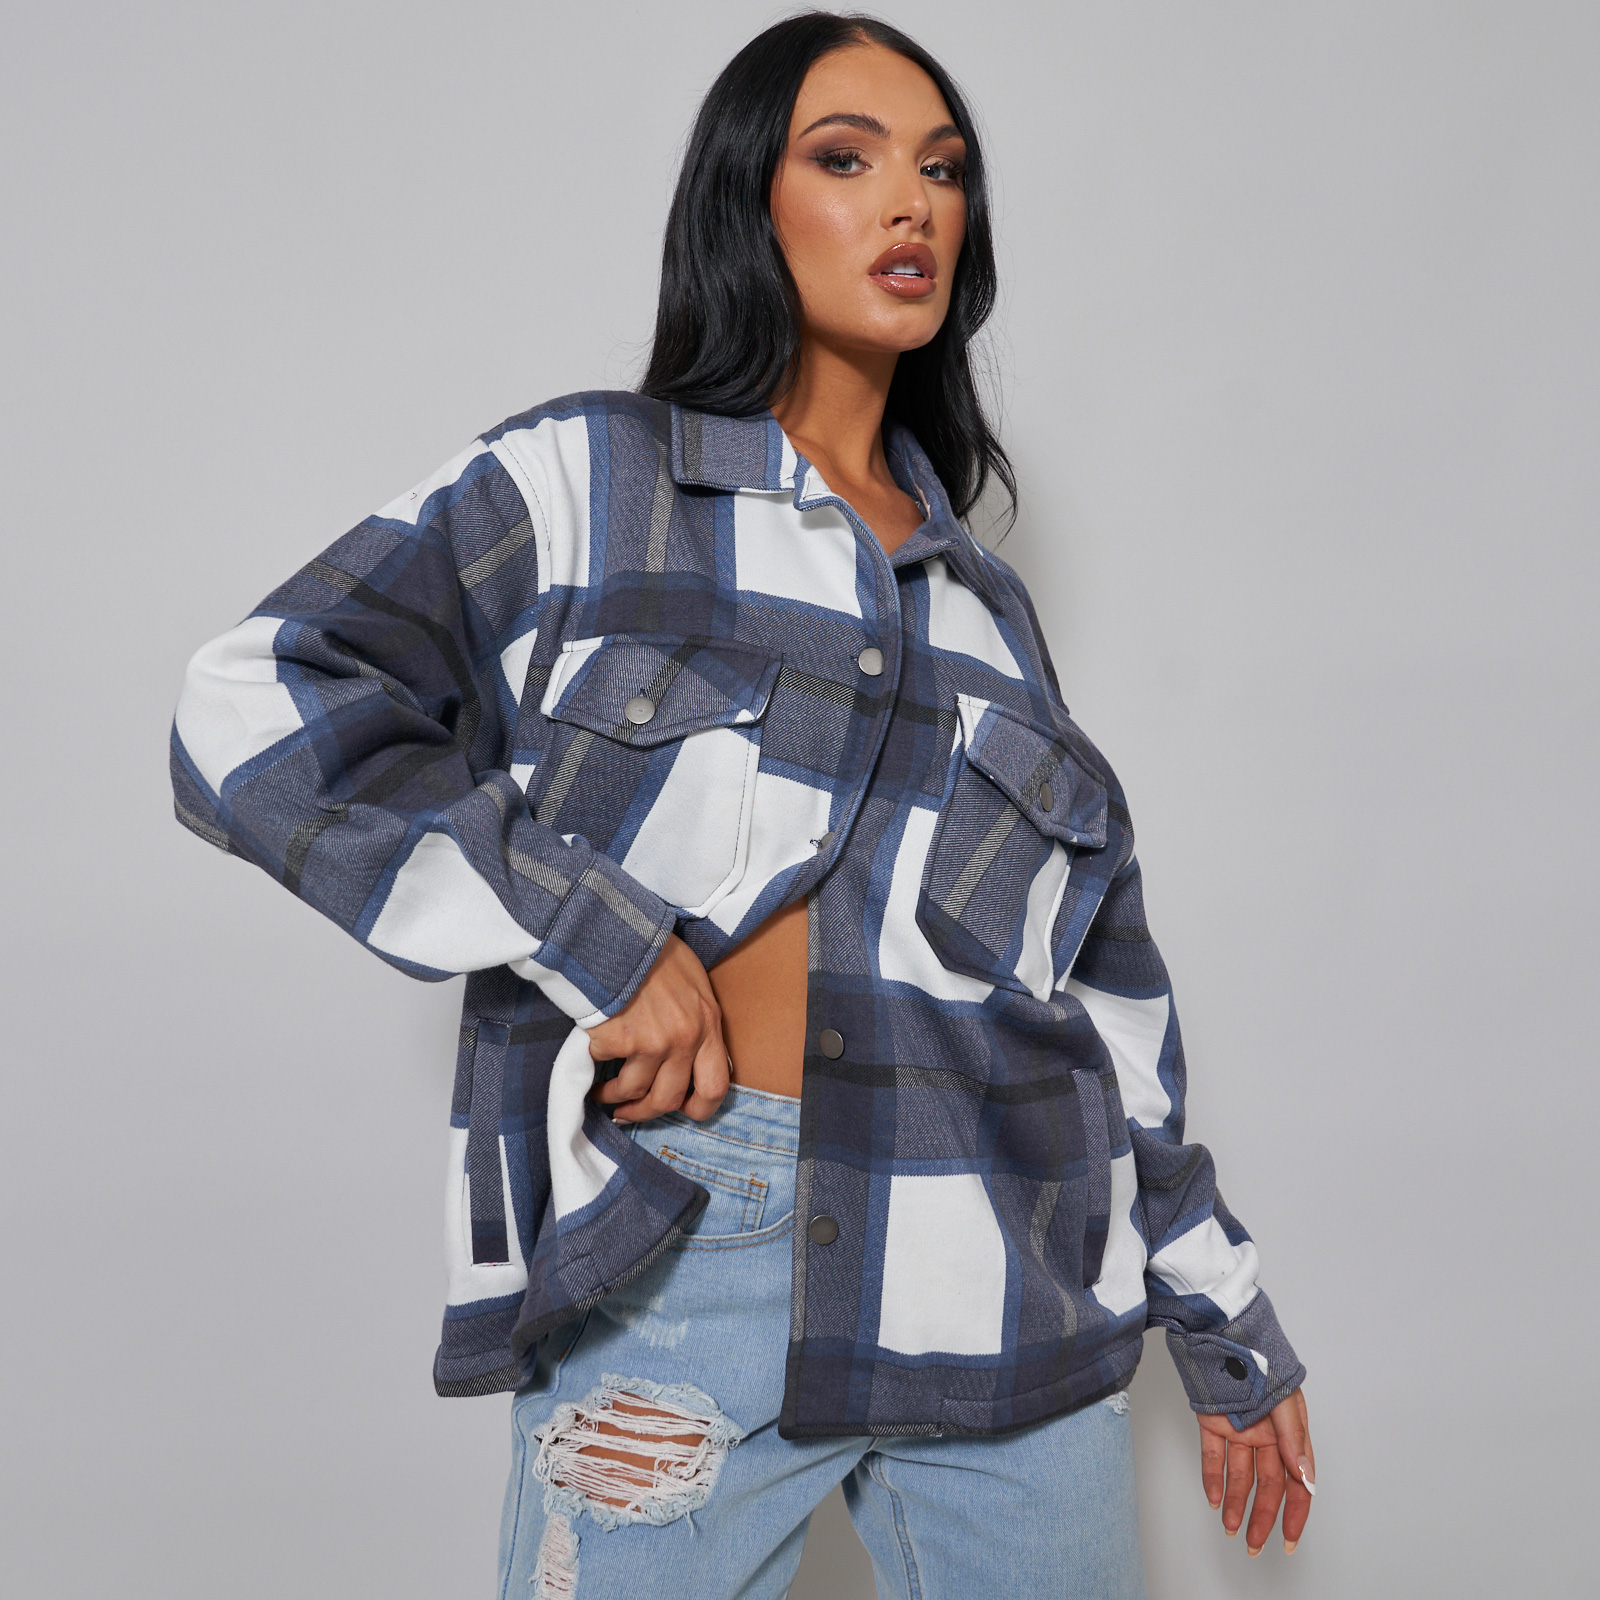 Button Front Plaid Jacket In Navy Blue And White UK Medium M, Blue